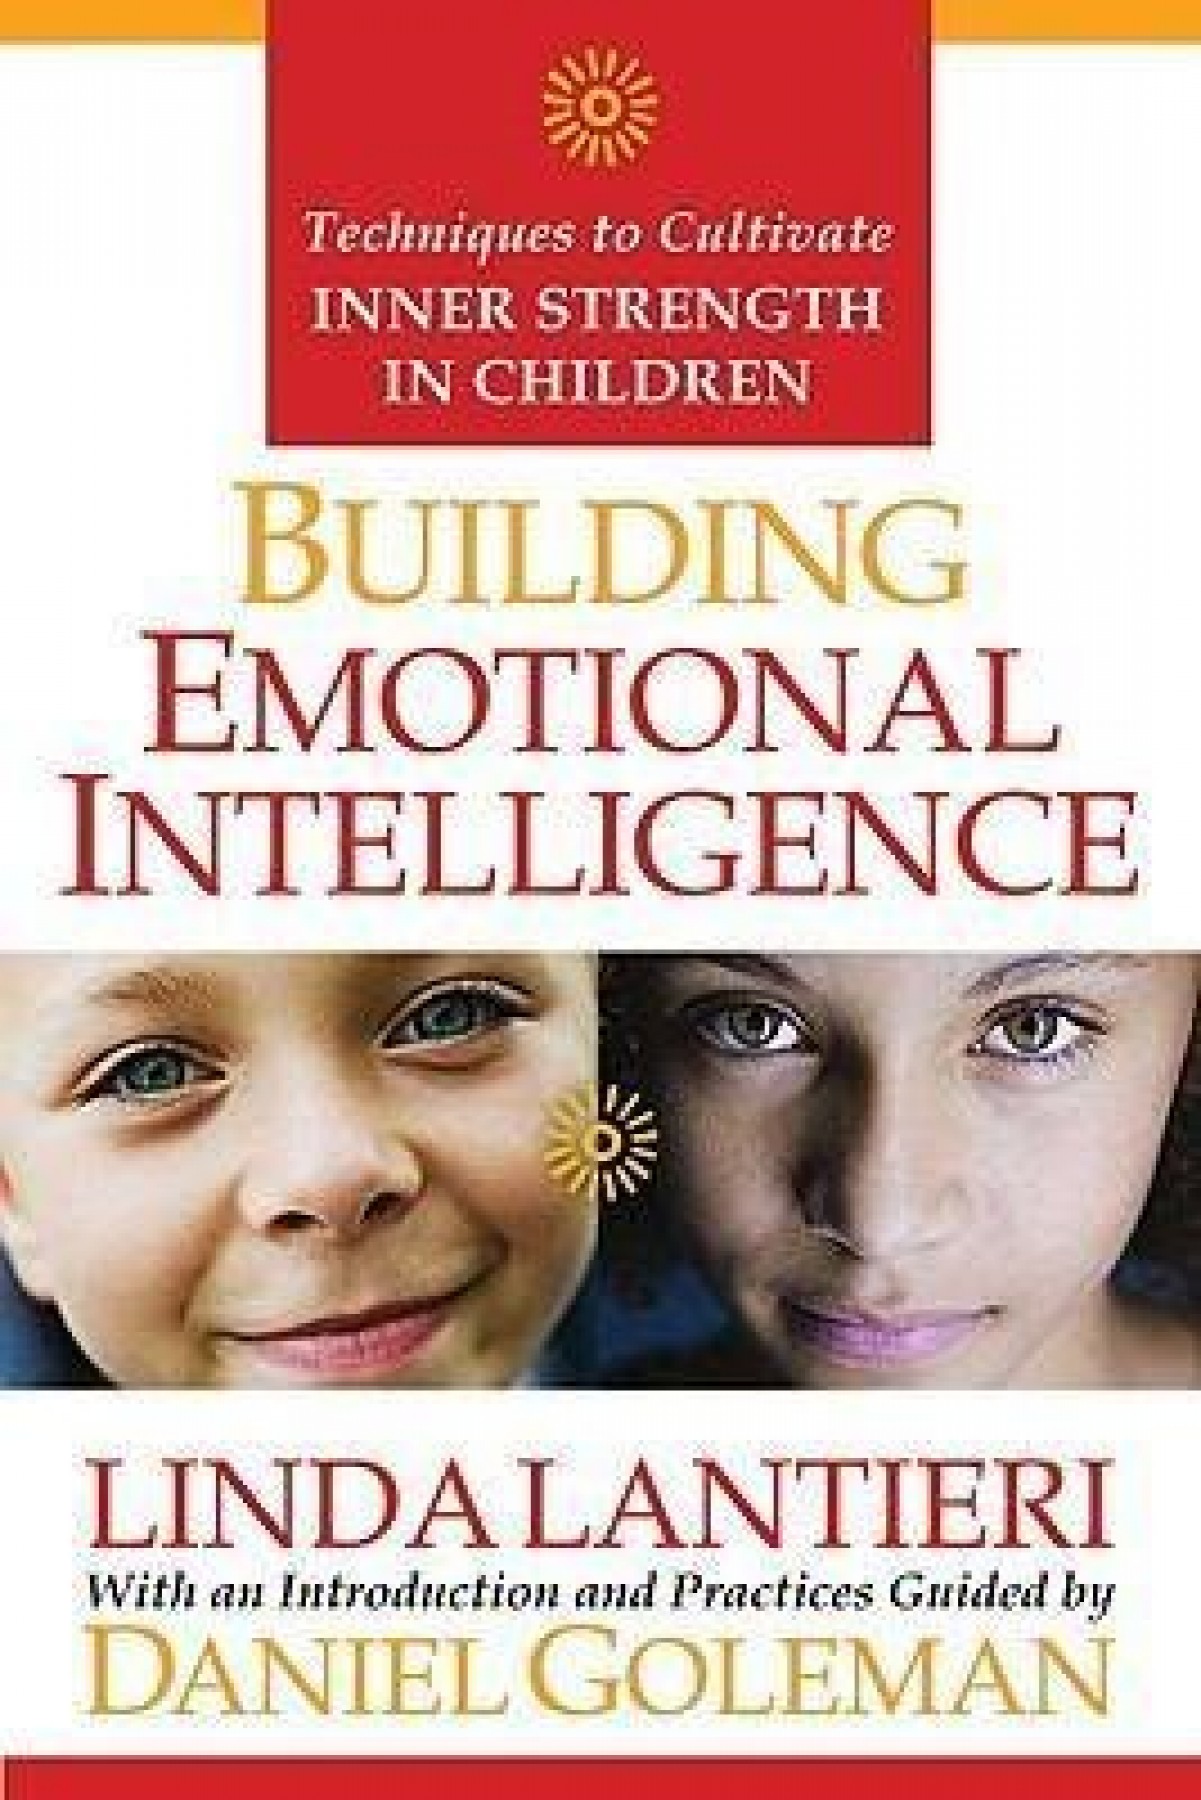 Building Emotional Intelligence: Techniques to cultivate inner strength in children